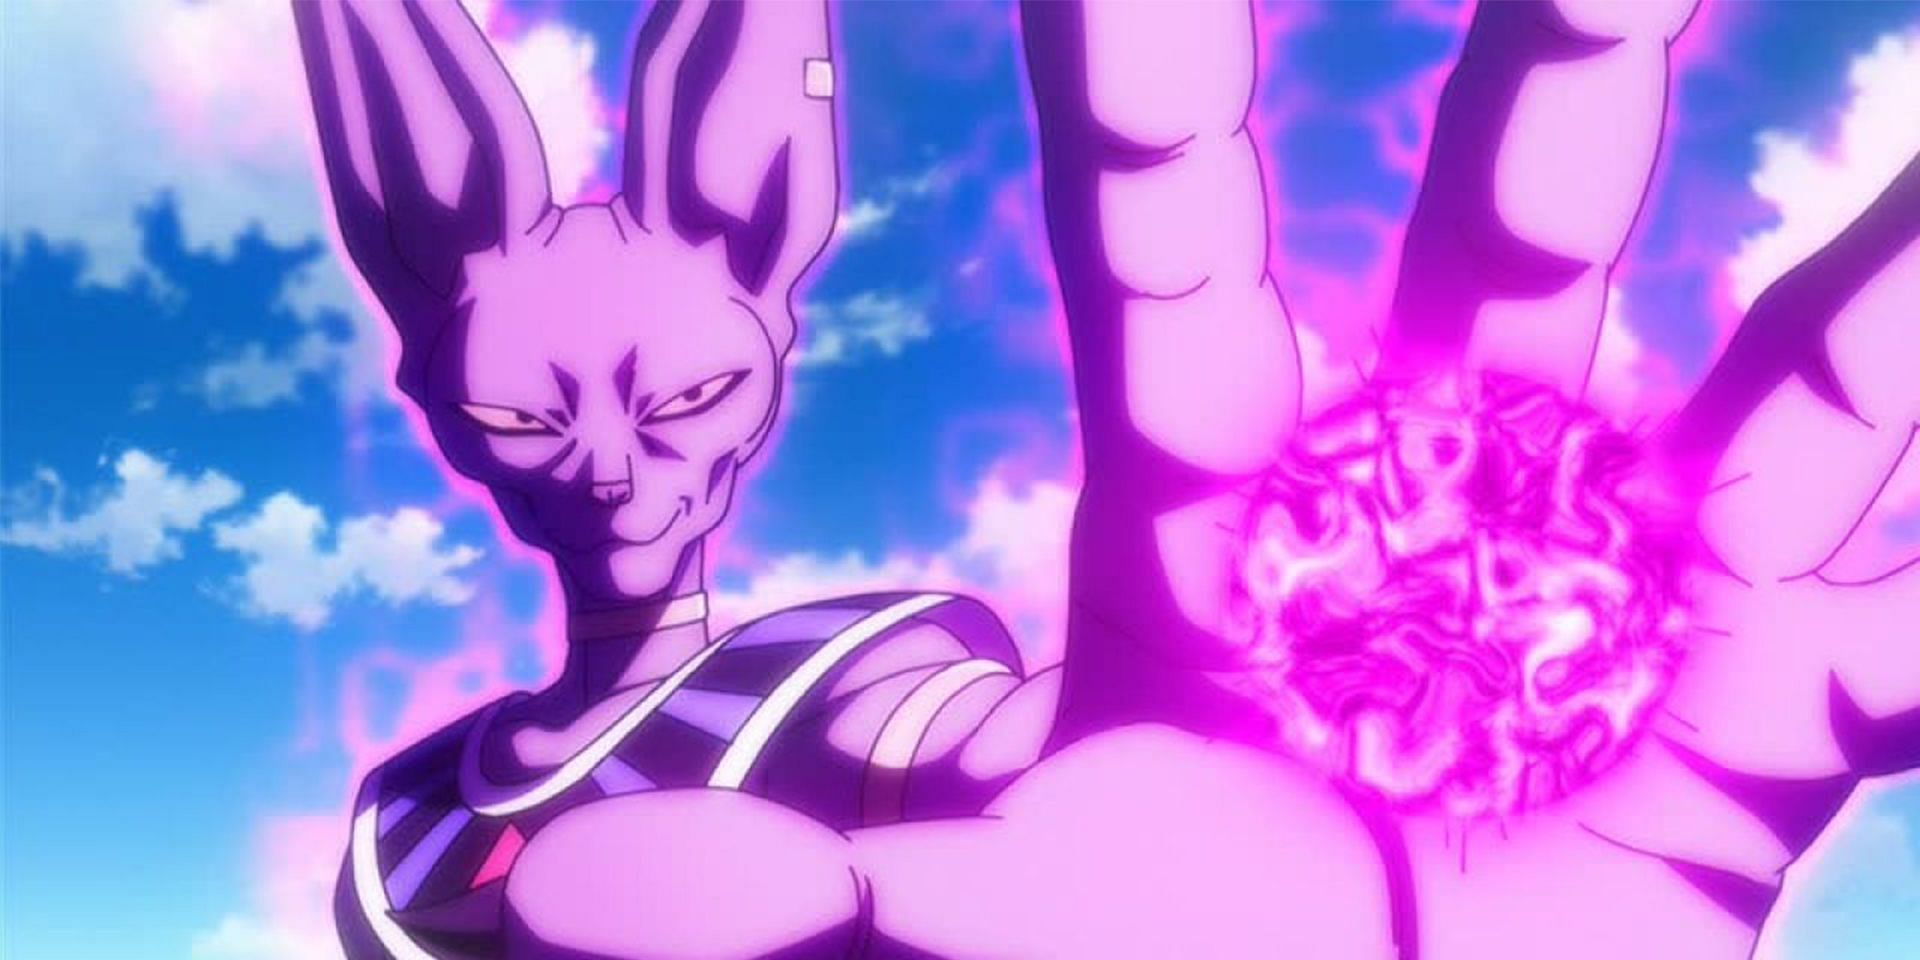 Beerus charging a blast in the palm of his hand in Dragon Ball Super